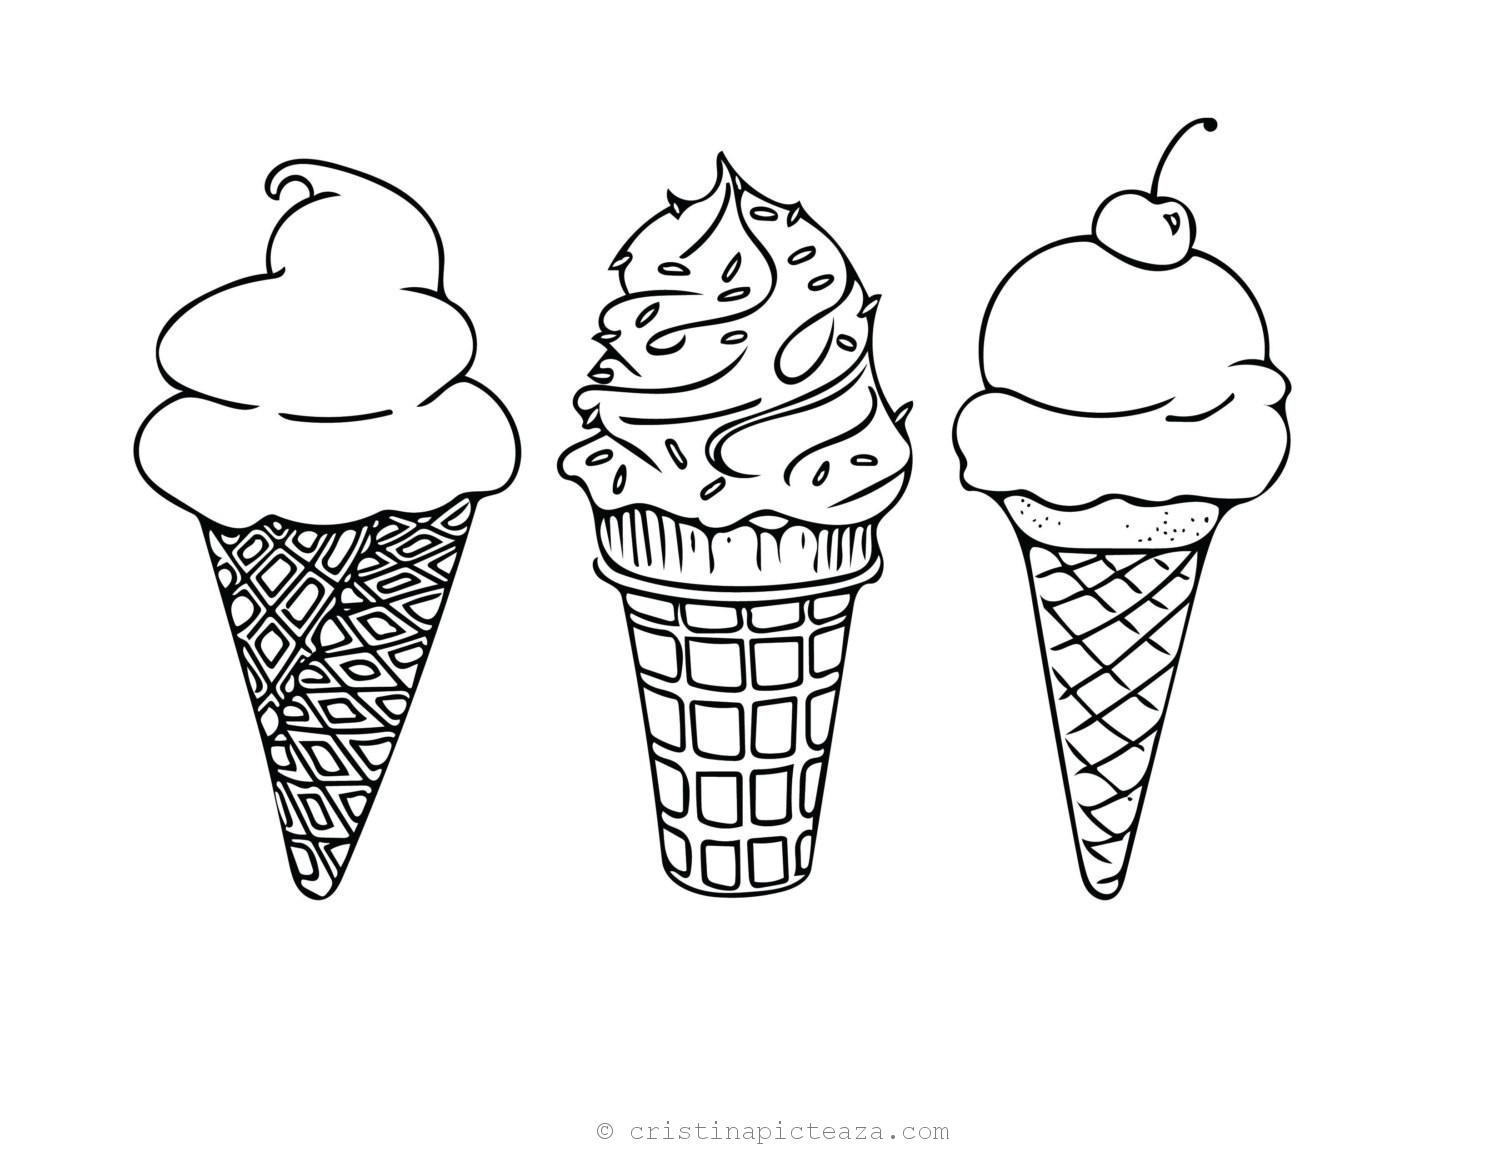 Coloring Page Of Ice Cream Pages For Coloring With Popsicles